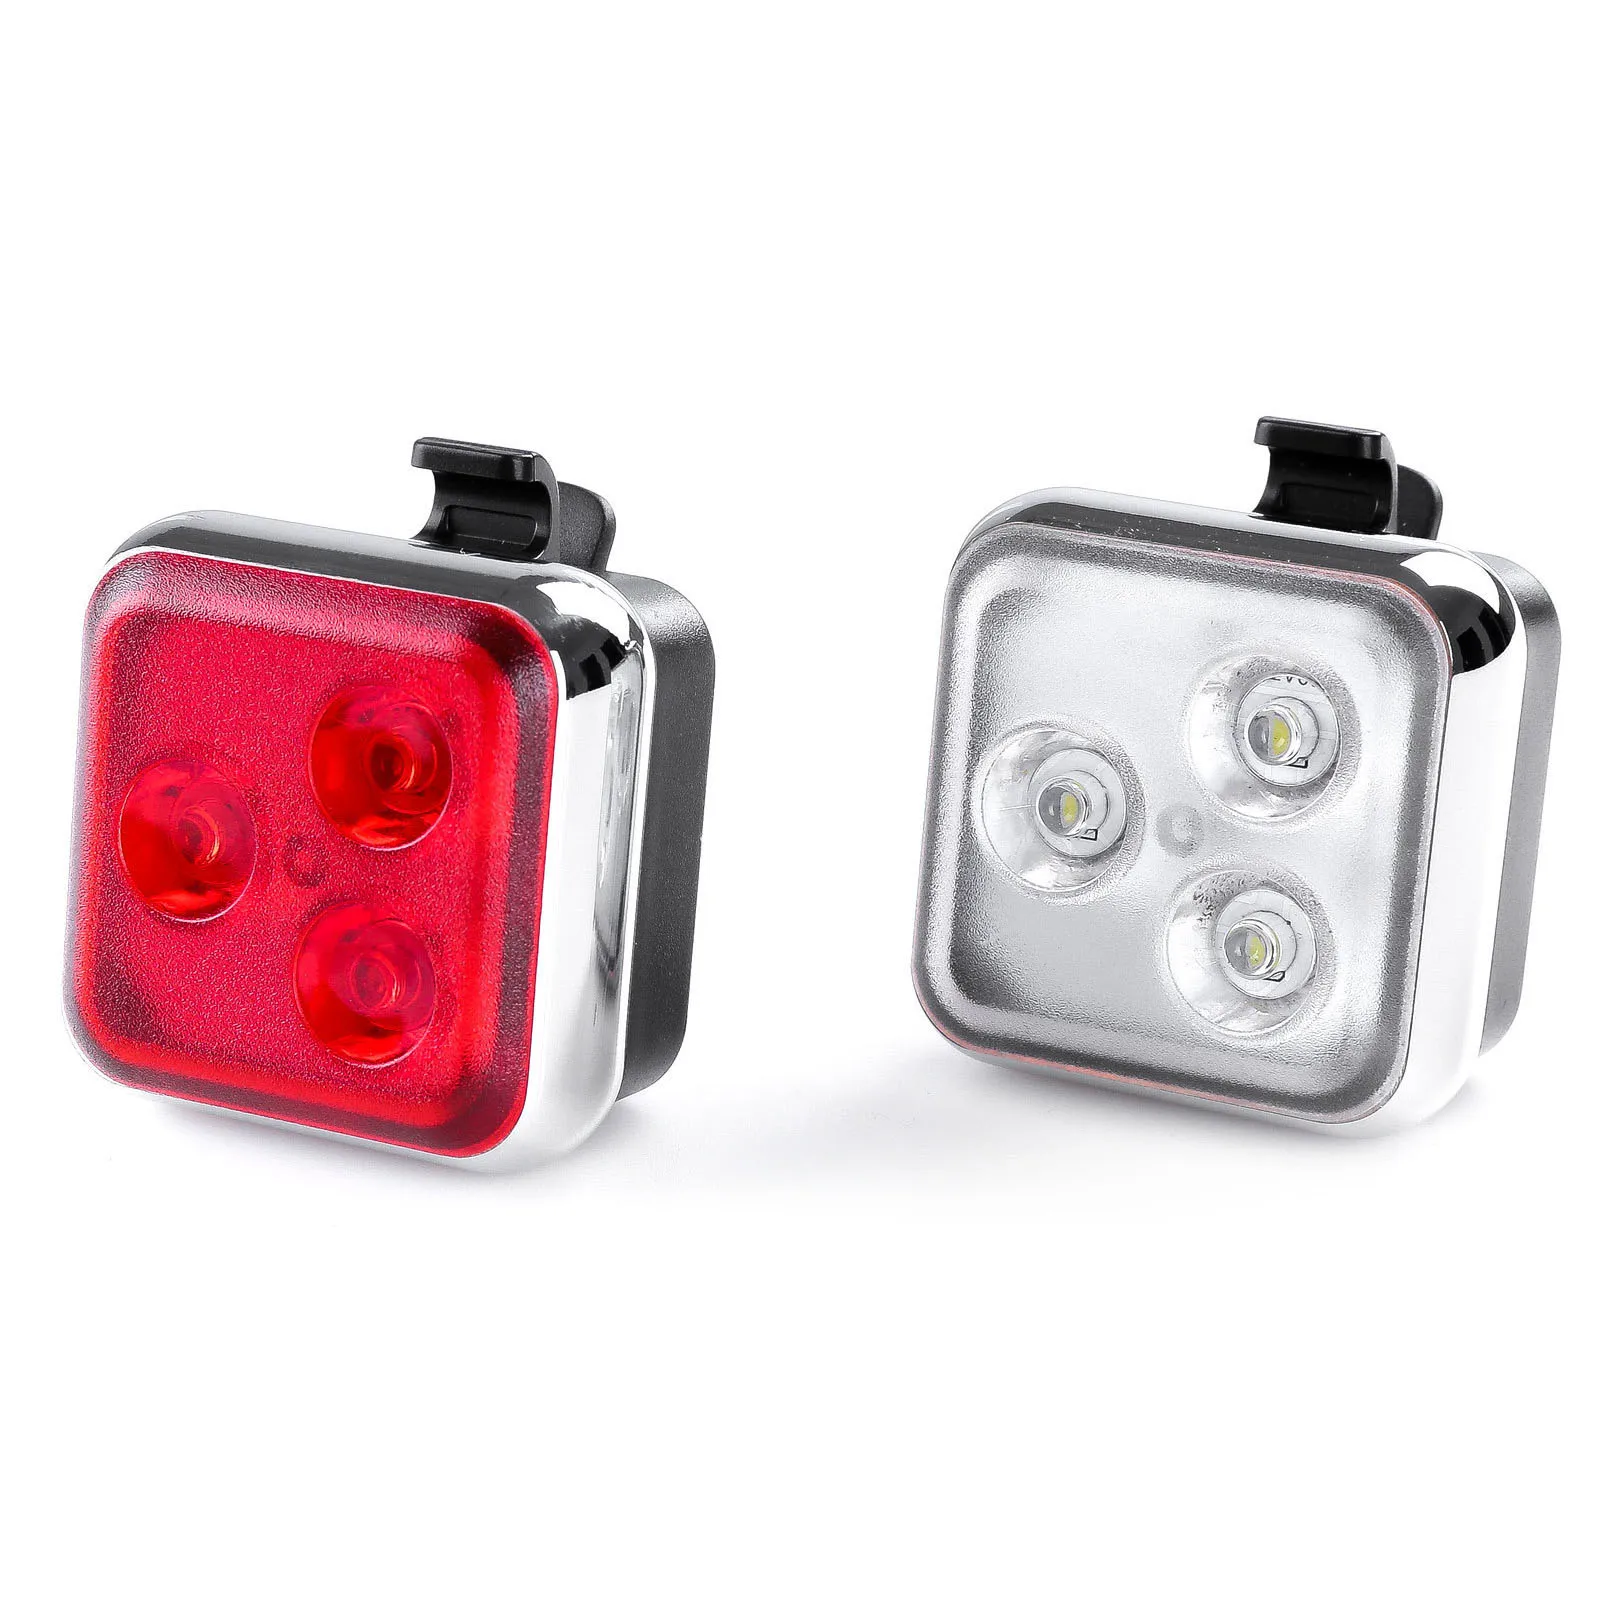 

Bicycle Rear Light Square Bike Warning Lamp IPX6 Waterproof USB Charge Red White Light Color Safety Headlight Tail